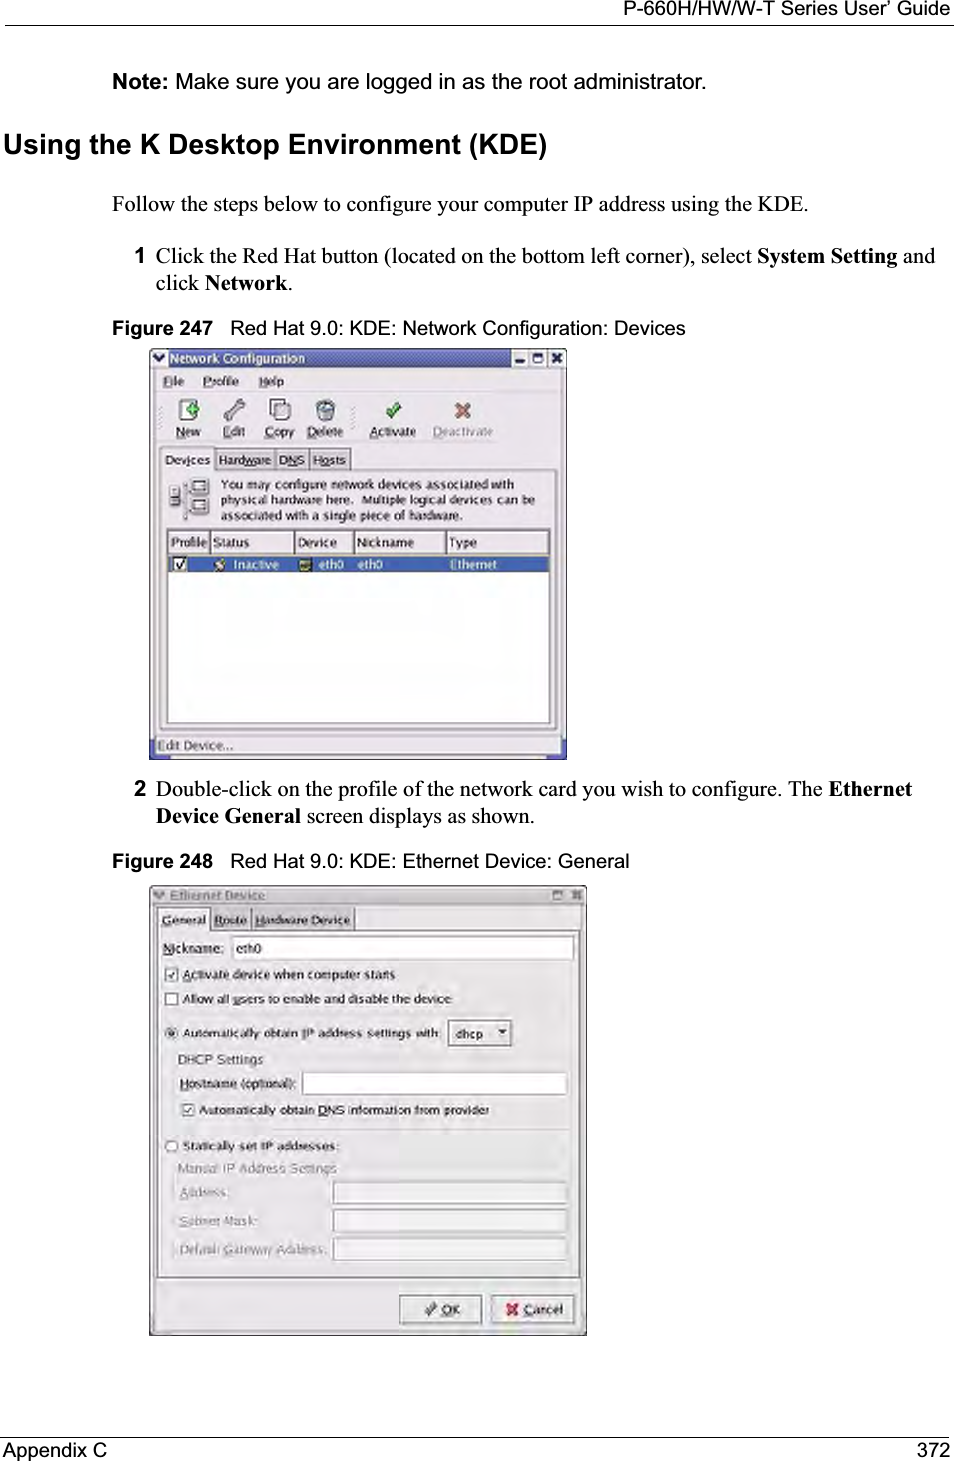 P-660H/HW/W-T Series User’ GuideAppendix C 372Note: Make sure you are logged in as the root administrator. Using the K Desktop Environment (KDE)Follow the steps below to configure your computer IP address using the KDE. 1Click the Red Hat button (located on the bottom left corner), select System Setting and click Network.Figure 247   Red Hat 9.0: KDE: Network Configuration: Devices 2Double-click on the profile of the network card you wish to configure. The EthernetDevice General screen displays as shown. Figure 248   Red Hat 9.0: KDE: Ethernet Device: General  